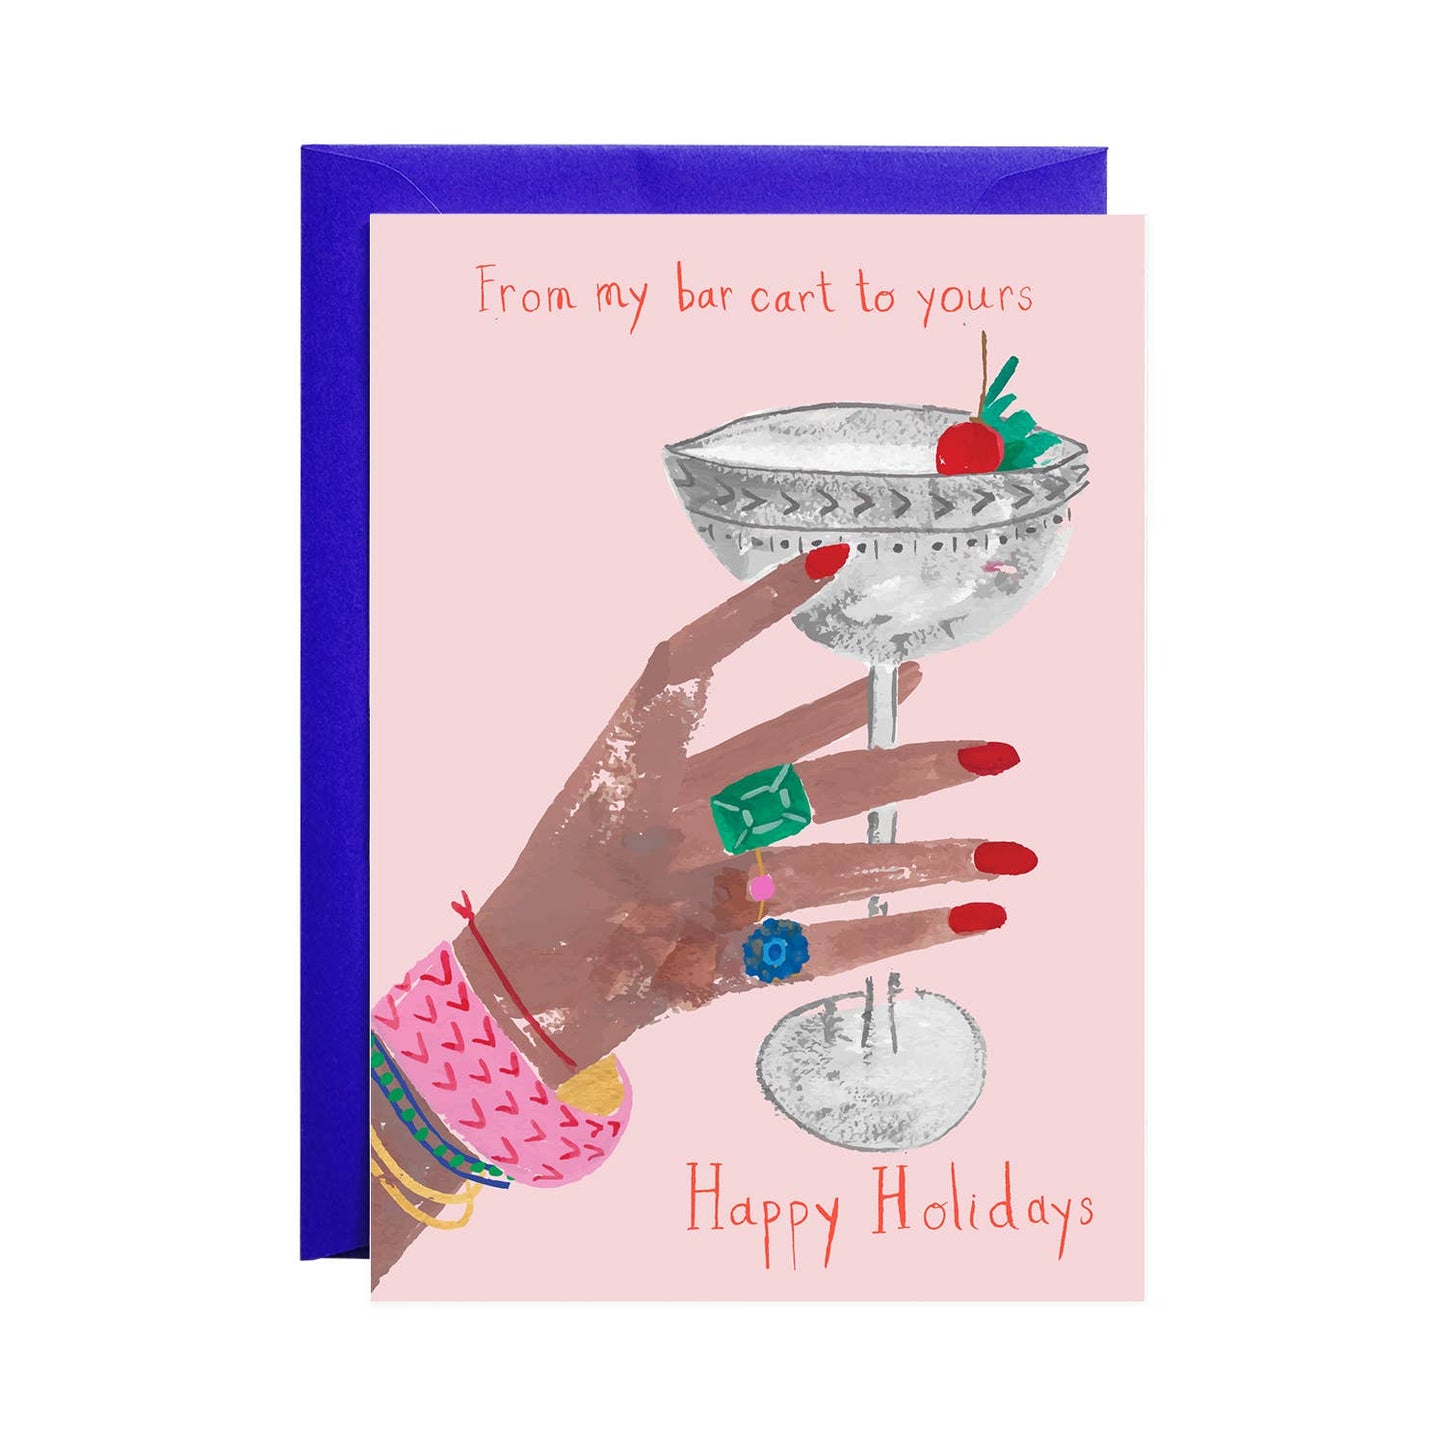 From My Bar Cart to Yours - Holiday Greeting Card